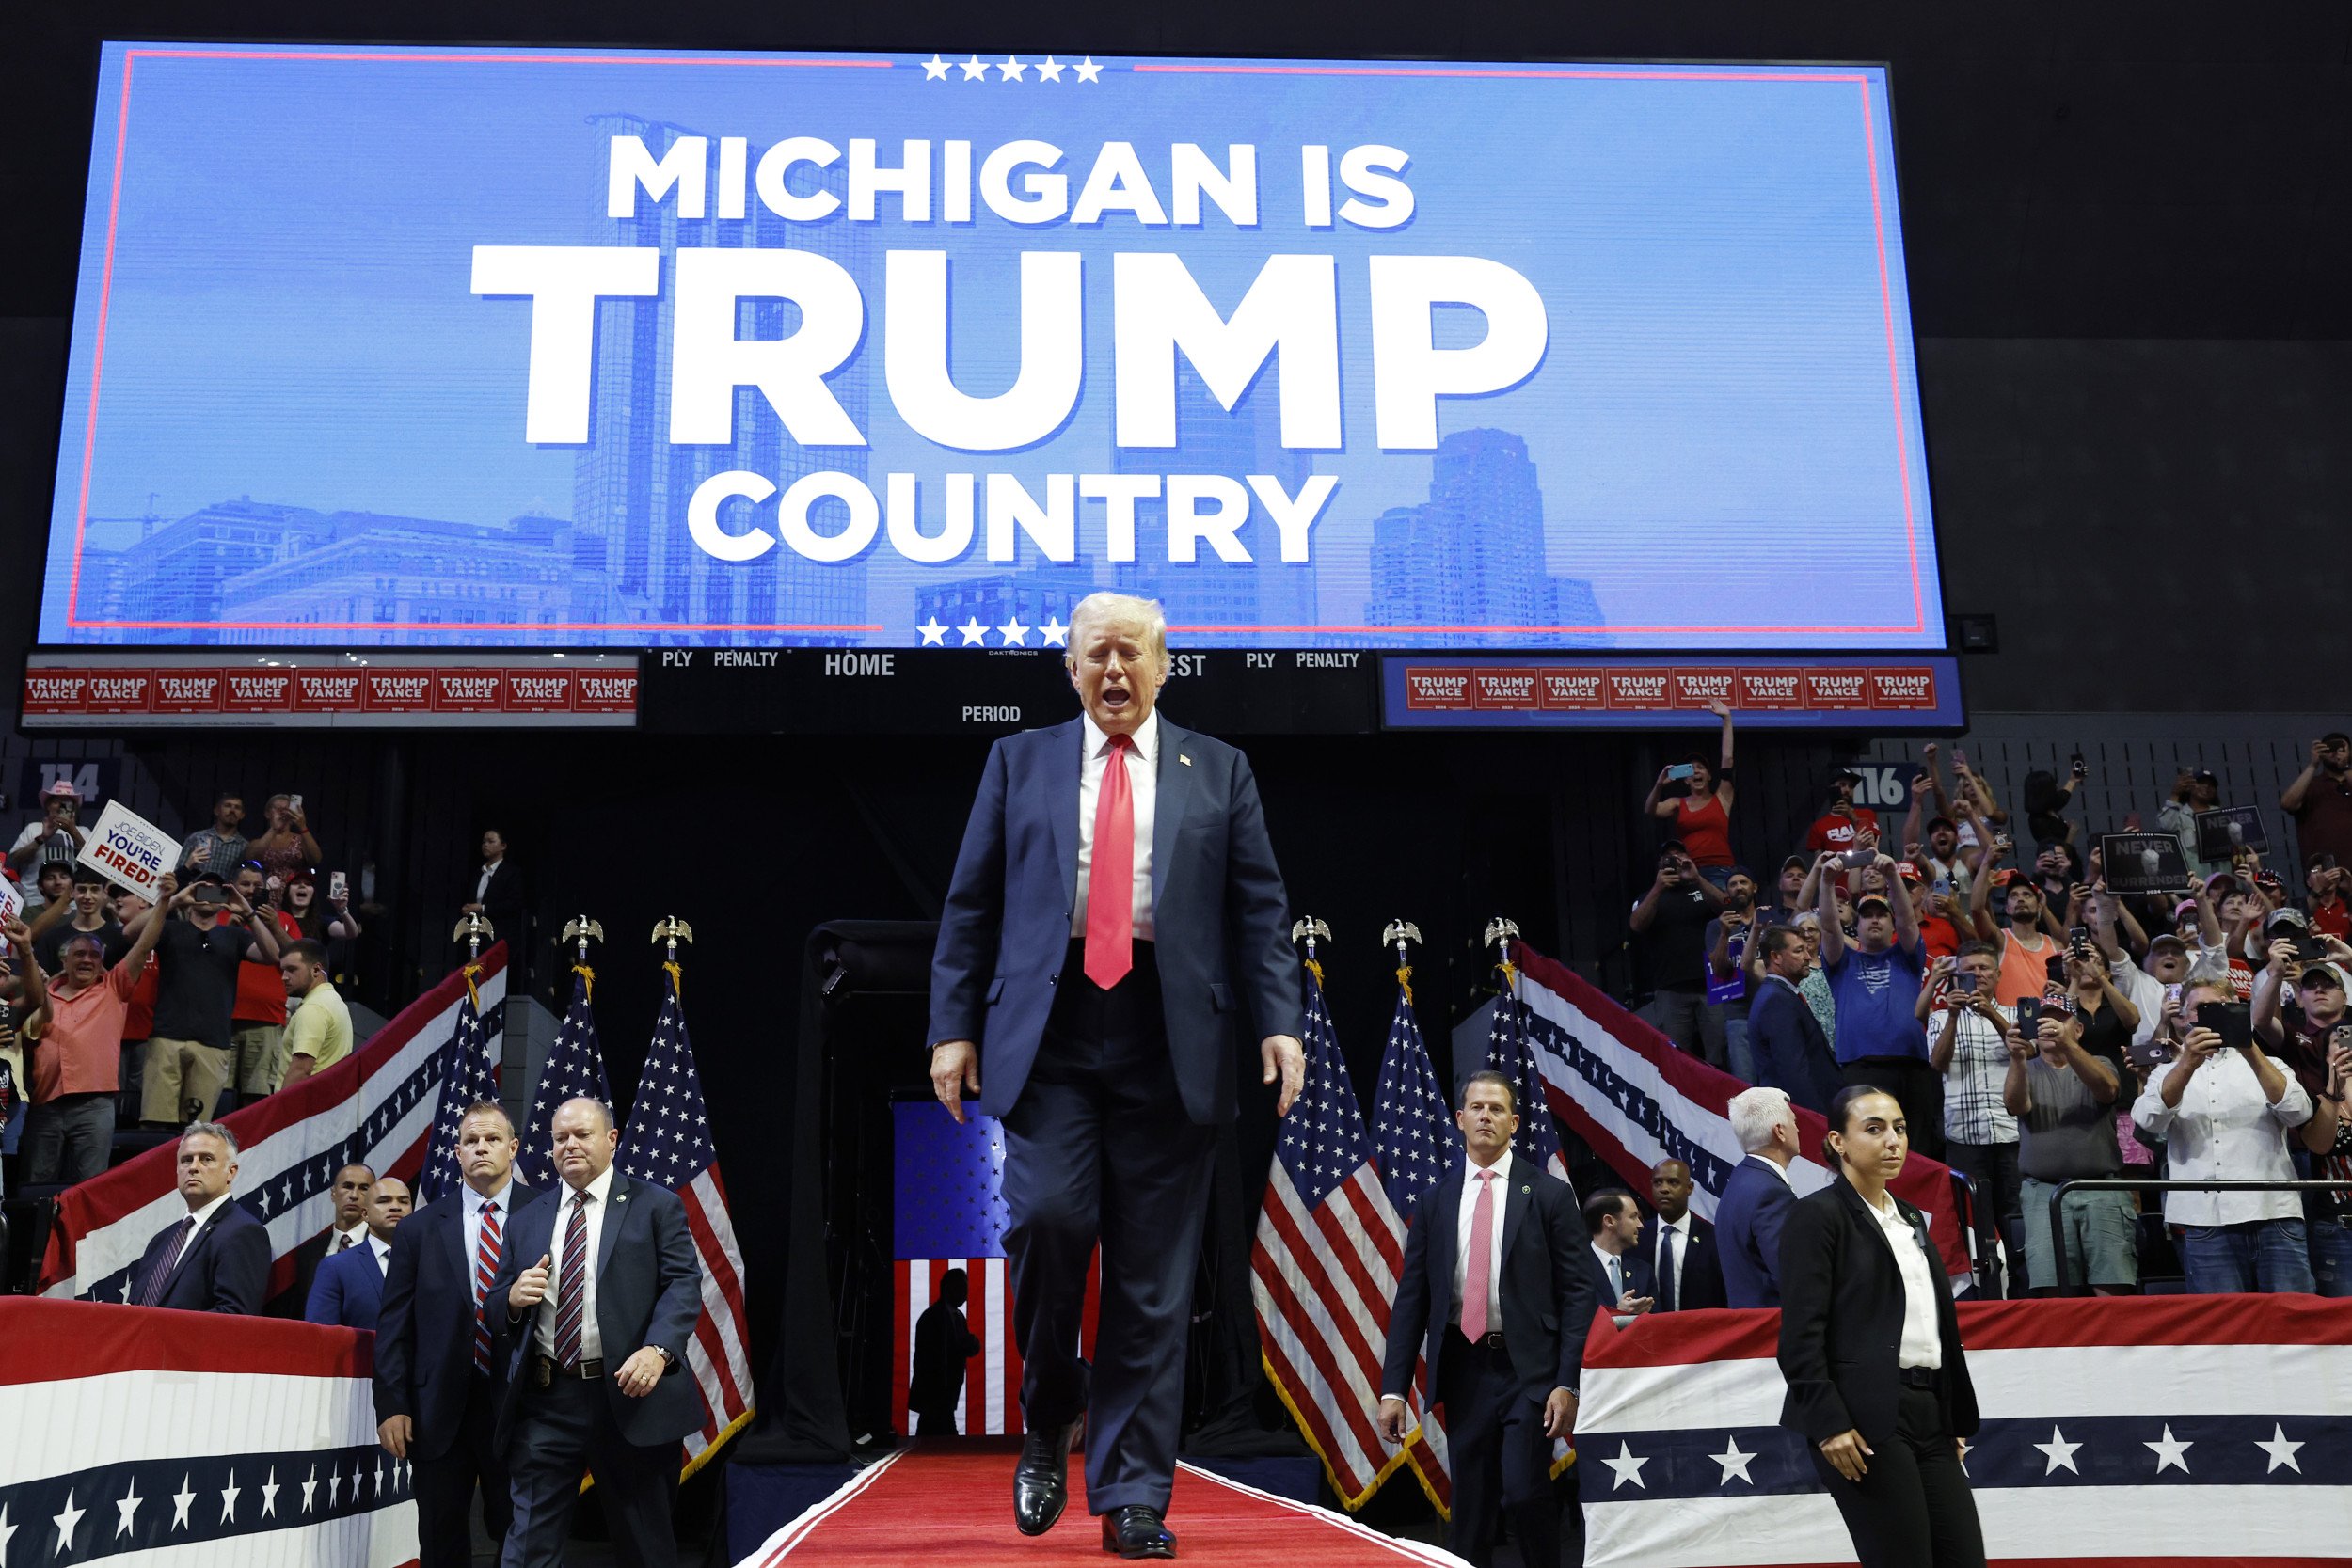 Key Moments from Donald Trump's Michigan Rally